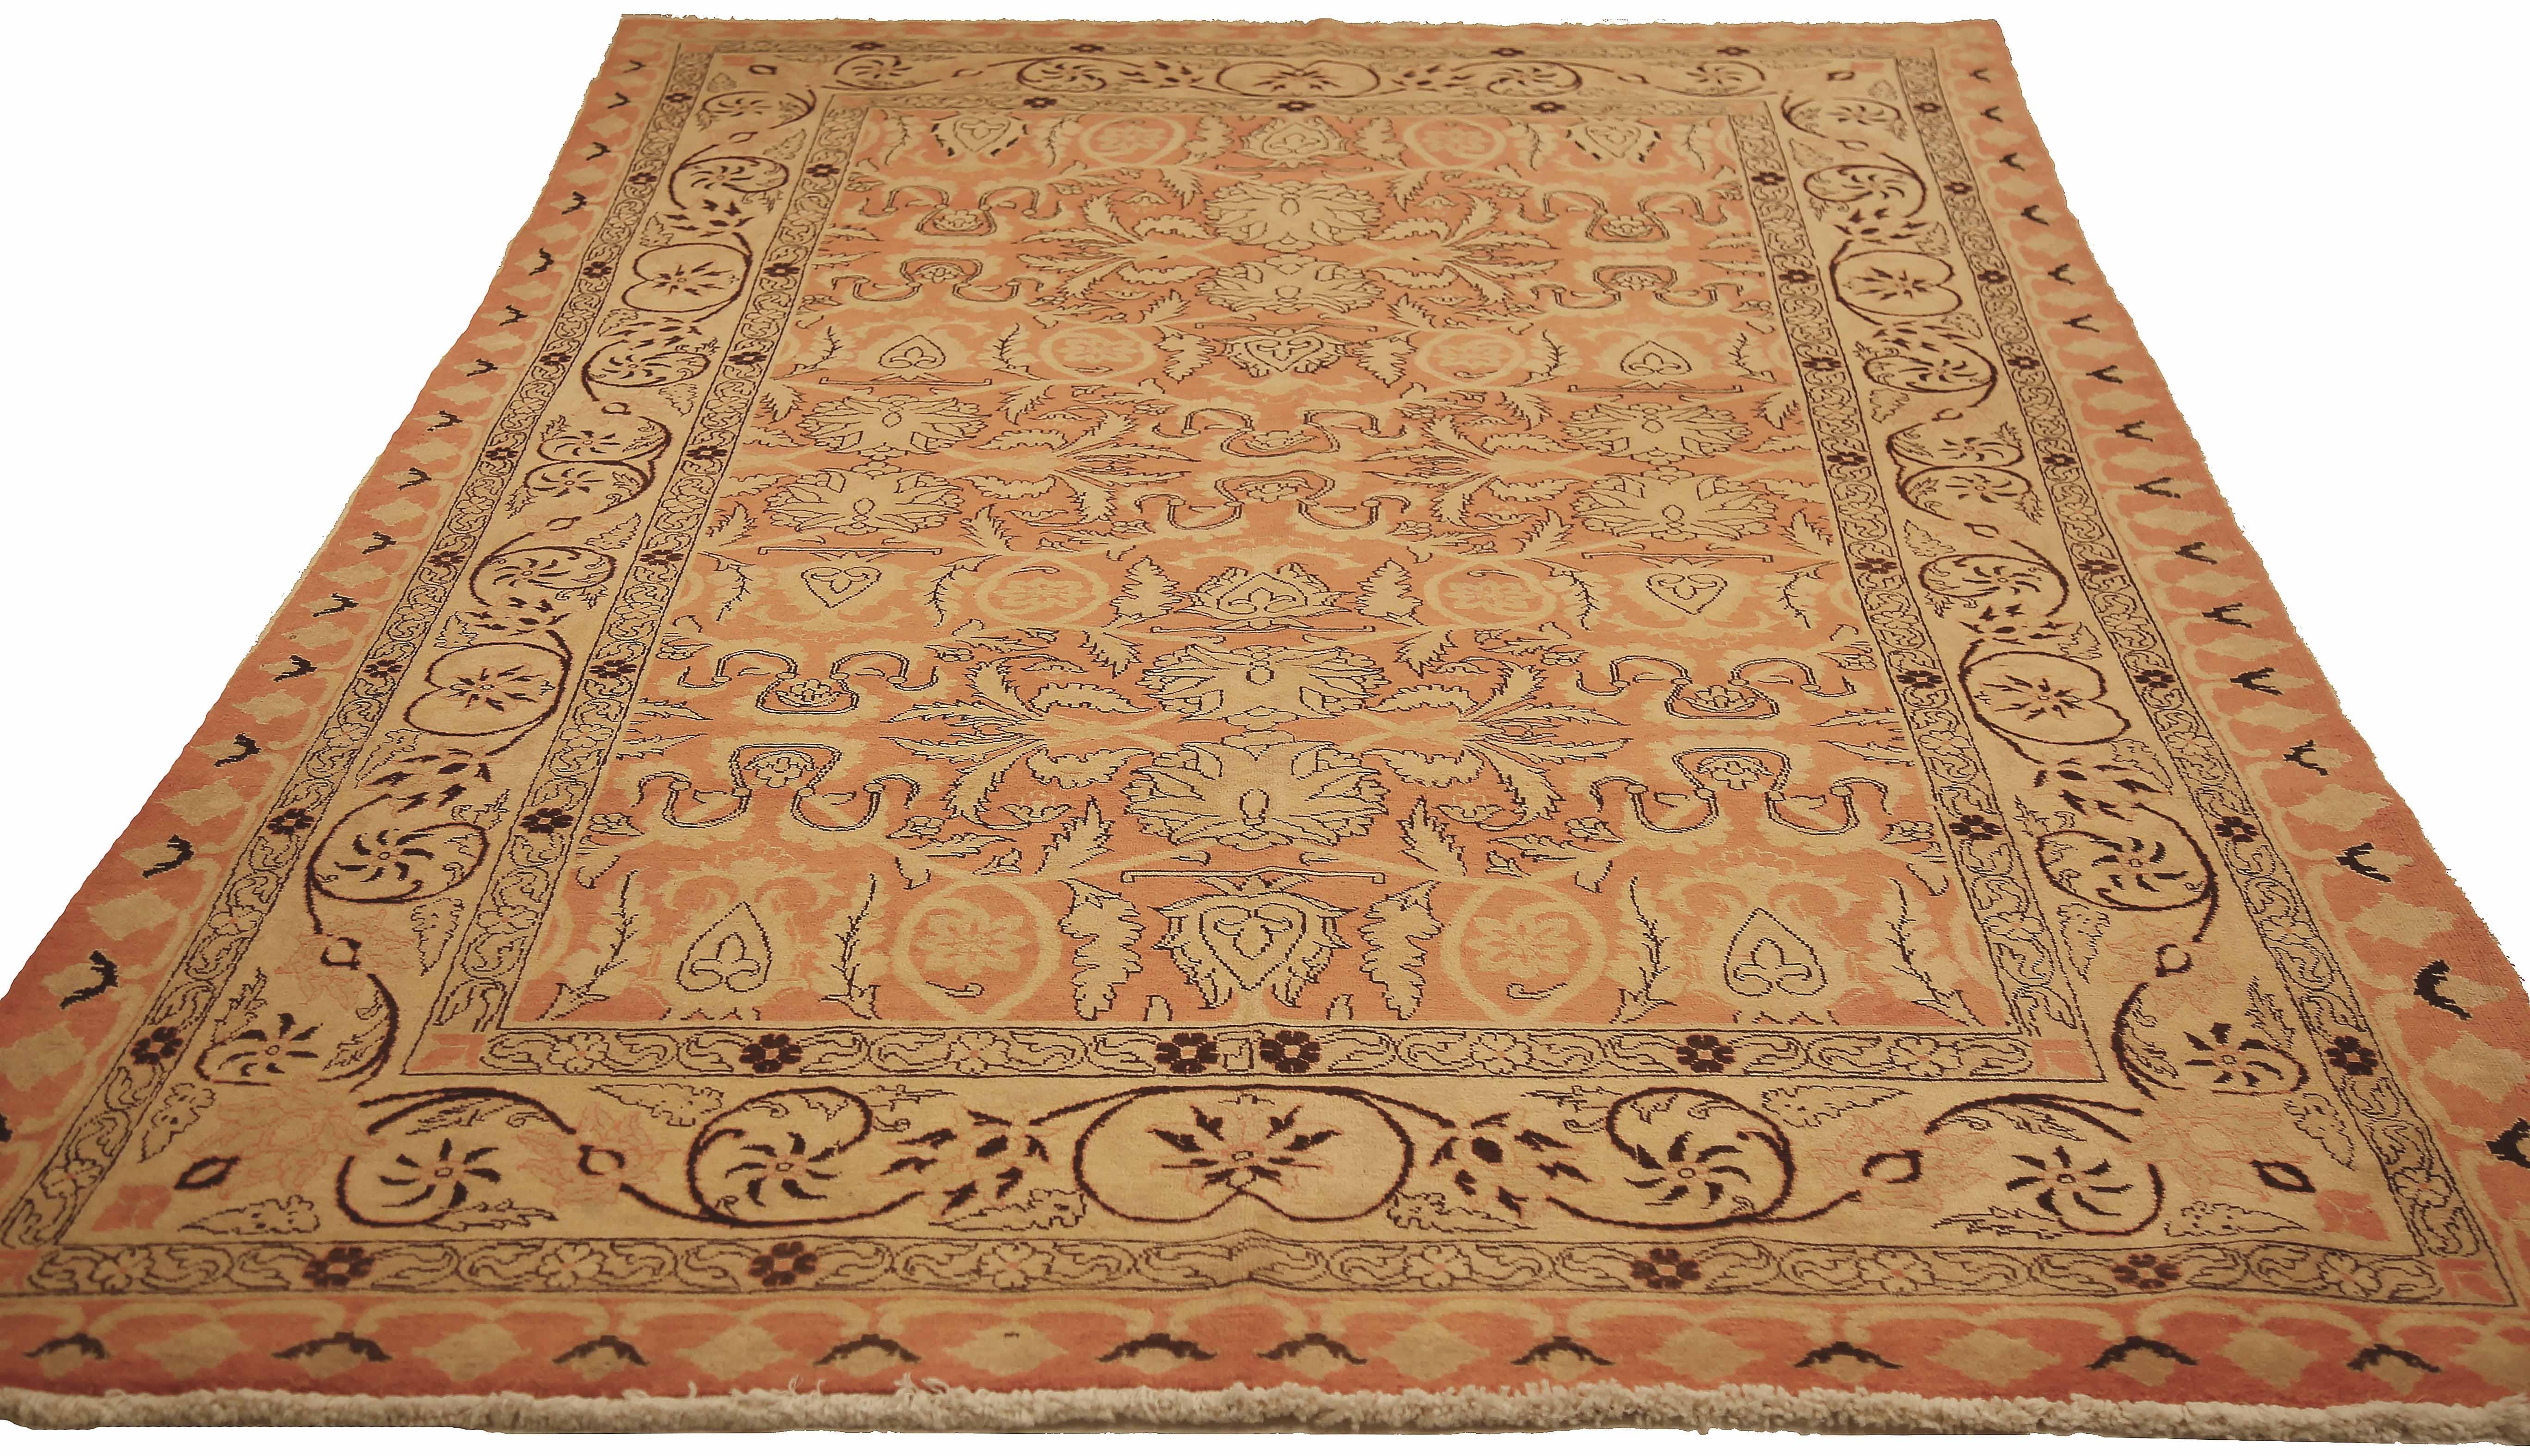 New Persian area rug handwoven from the finest sheep’s wool. It’s colored with all-natural vegetable dyes that are safe for humans and pets. It’s a traditional Tabriz design handwoven by expert artisans. It’s a lovely area rug that can be